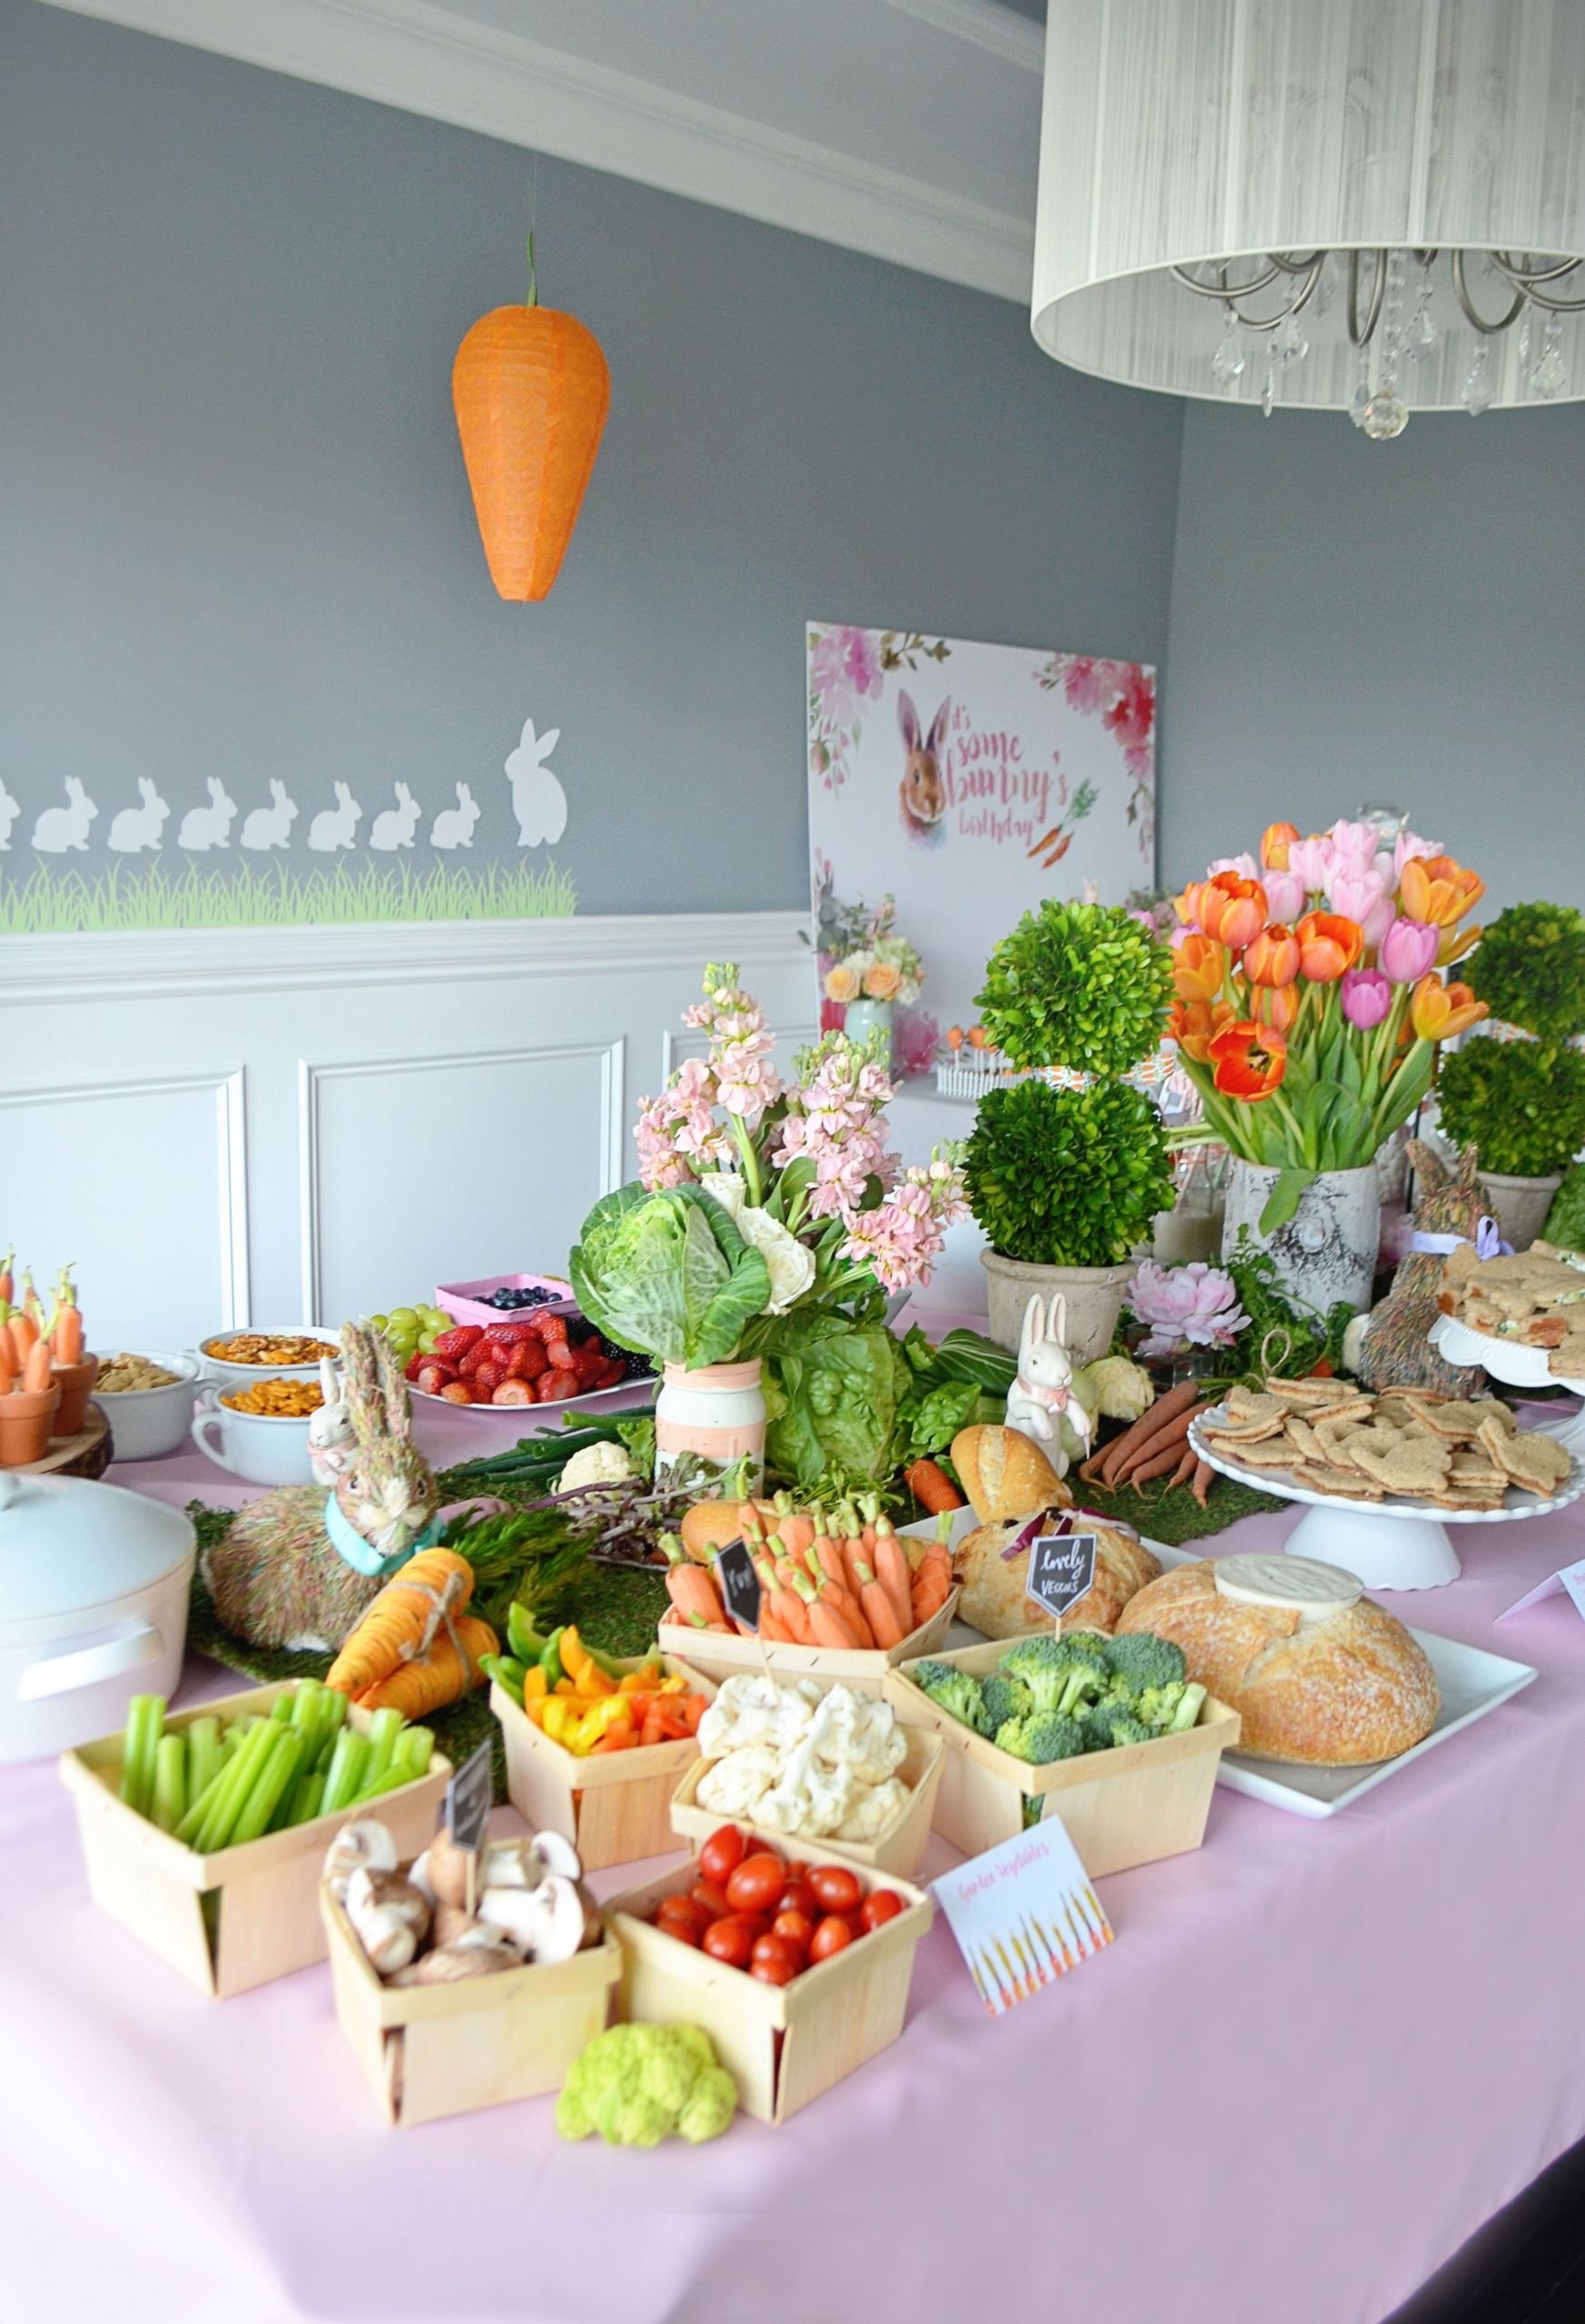 Fun Ideas For Easter Party
 Shop the Party Bunny Themed Party